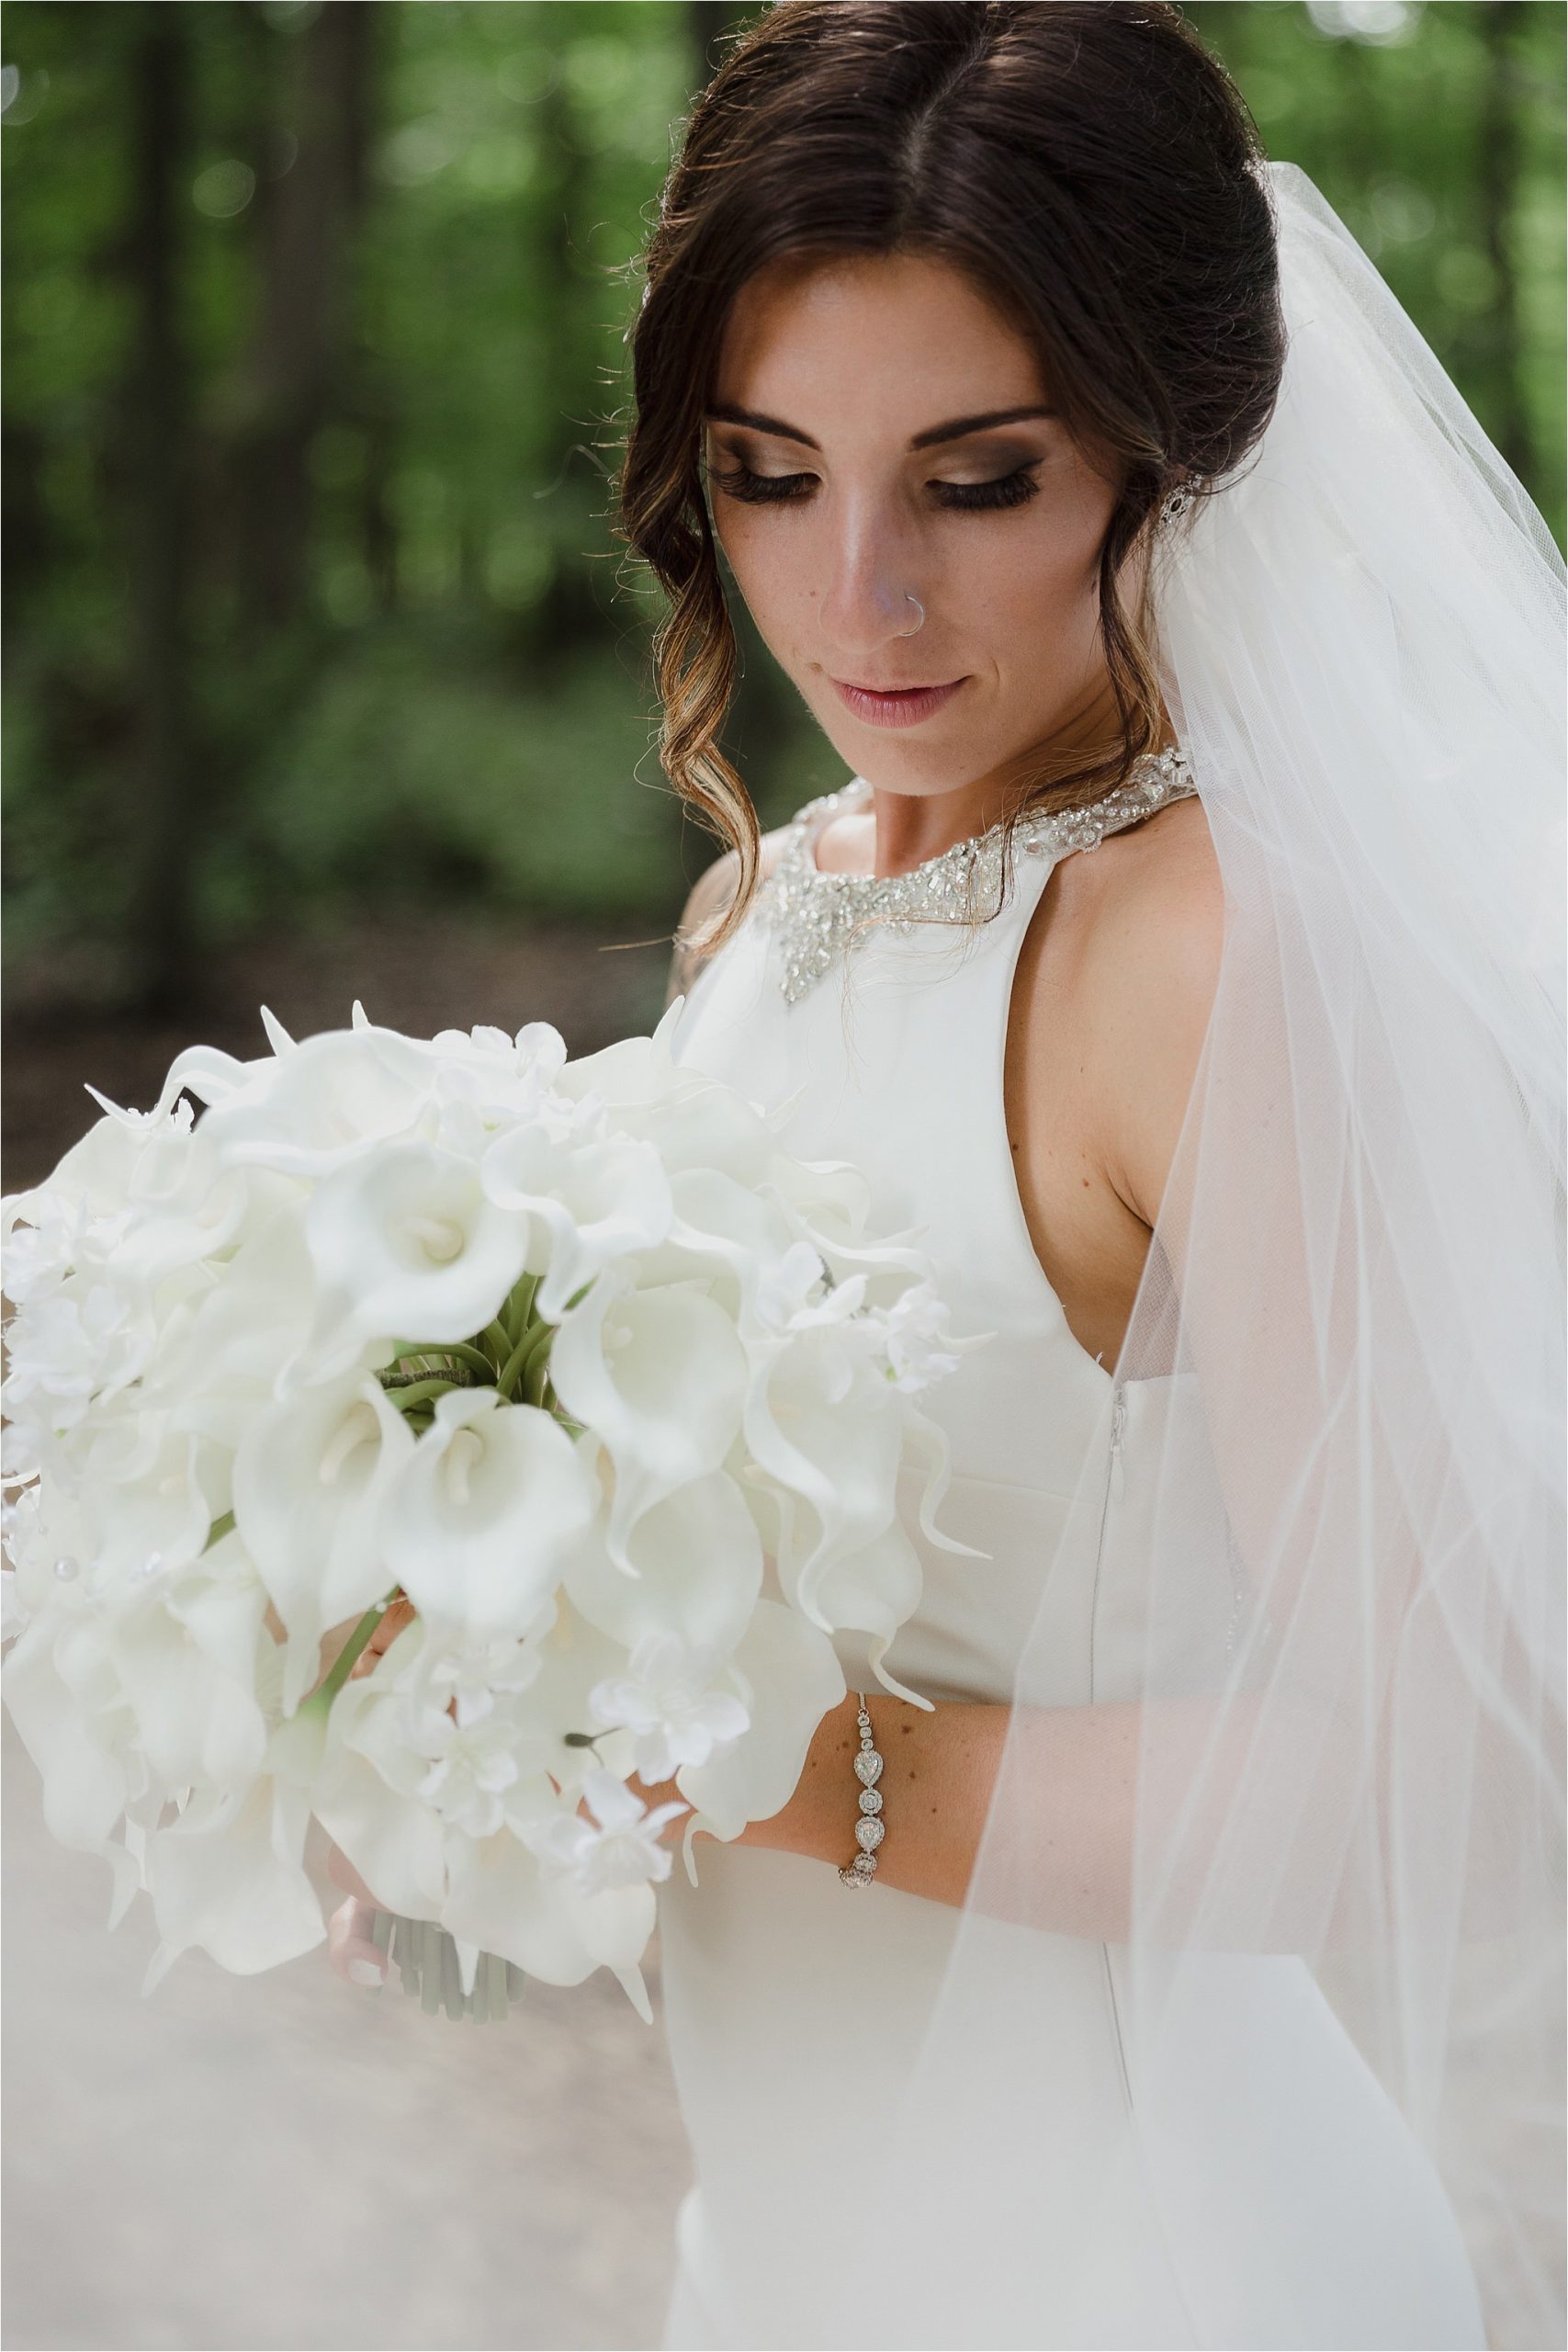 Sonia V Photography, The Clearing ceremony wedding venue, bride in the forest with floral bouquet and veil